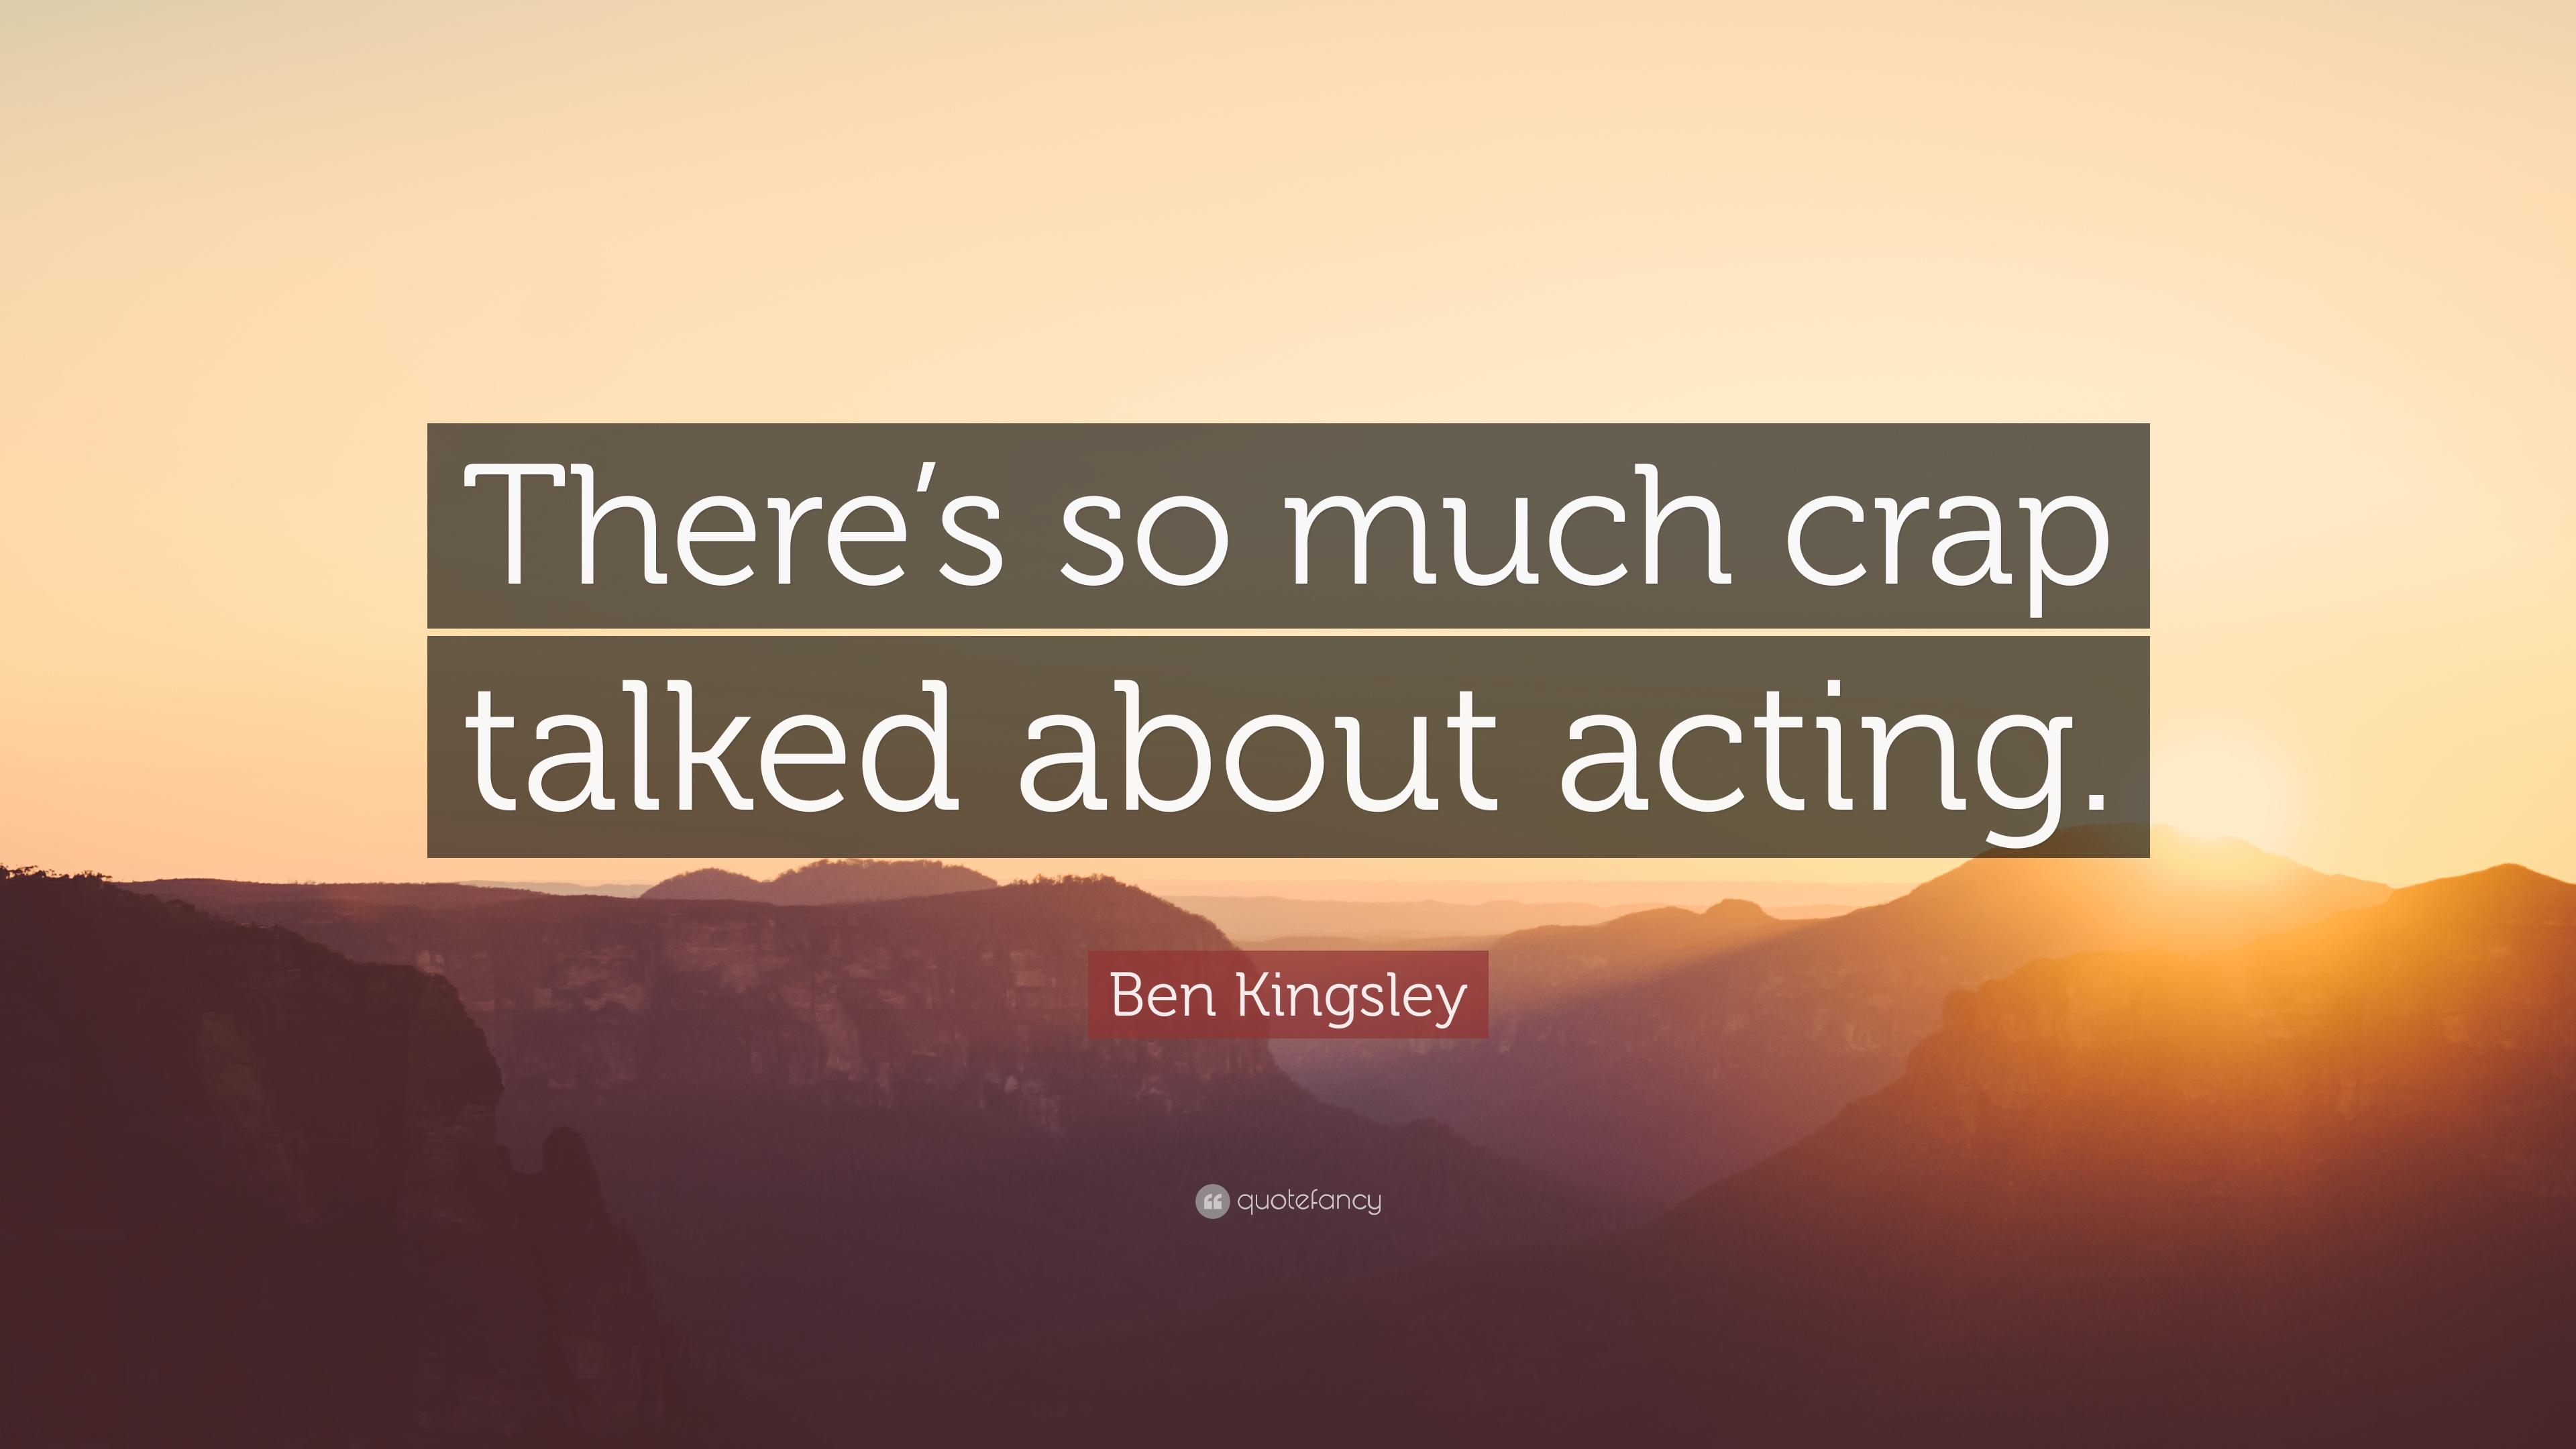 Ben Kingsley Quote: “There's so much crap talked about acting.” 7